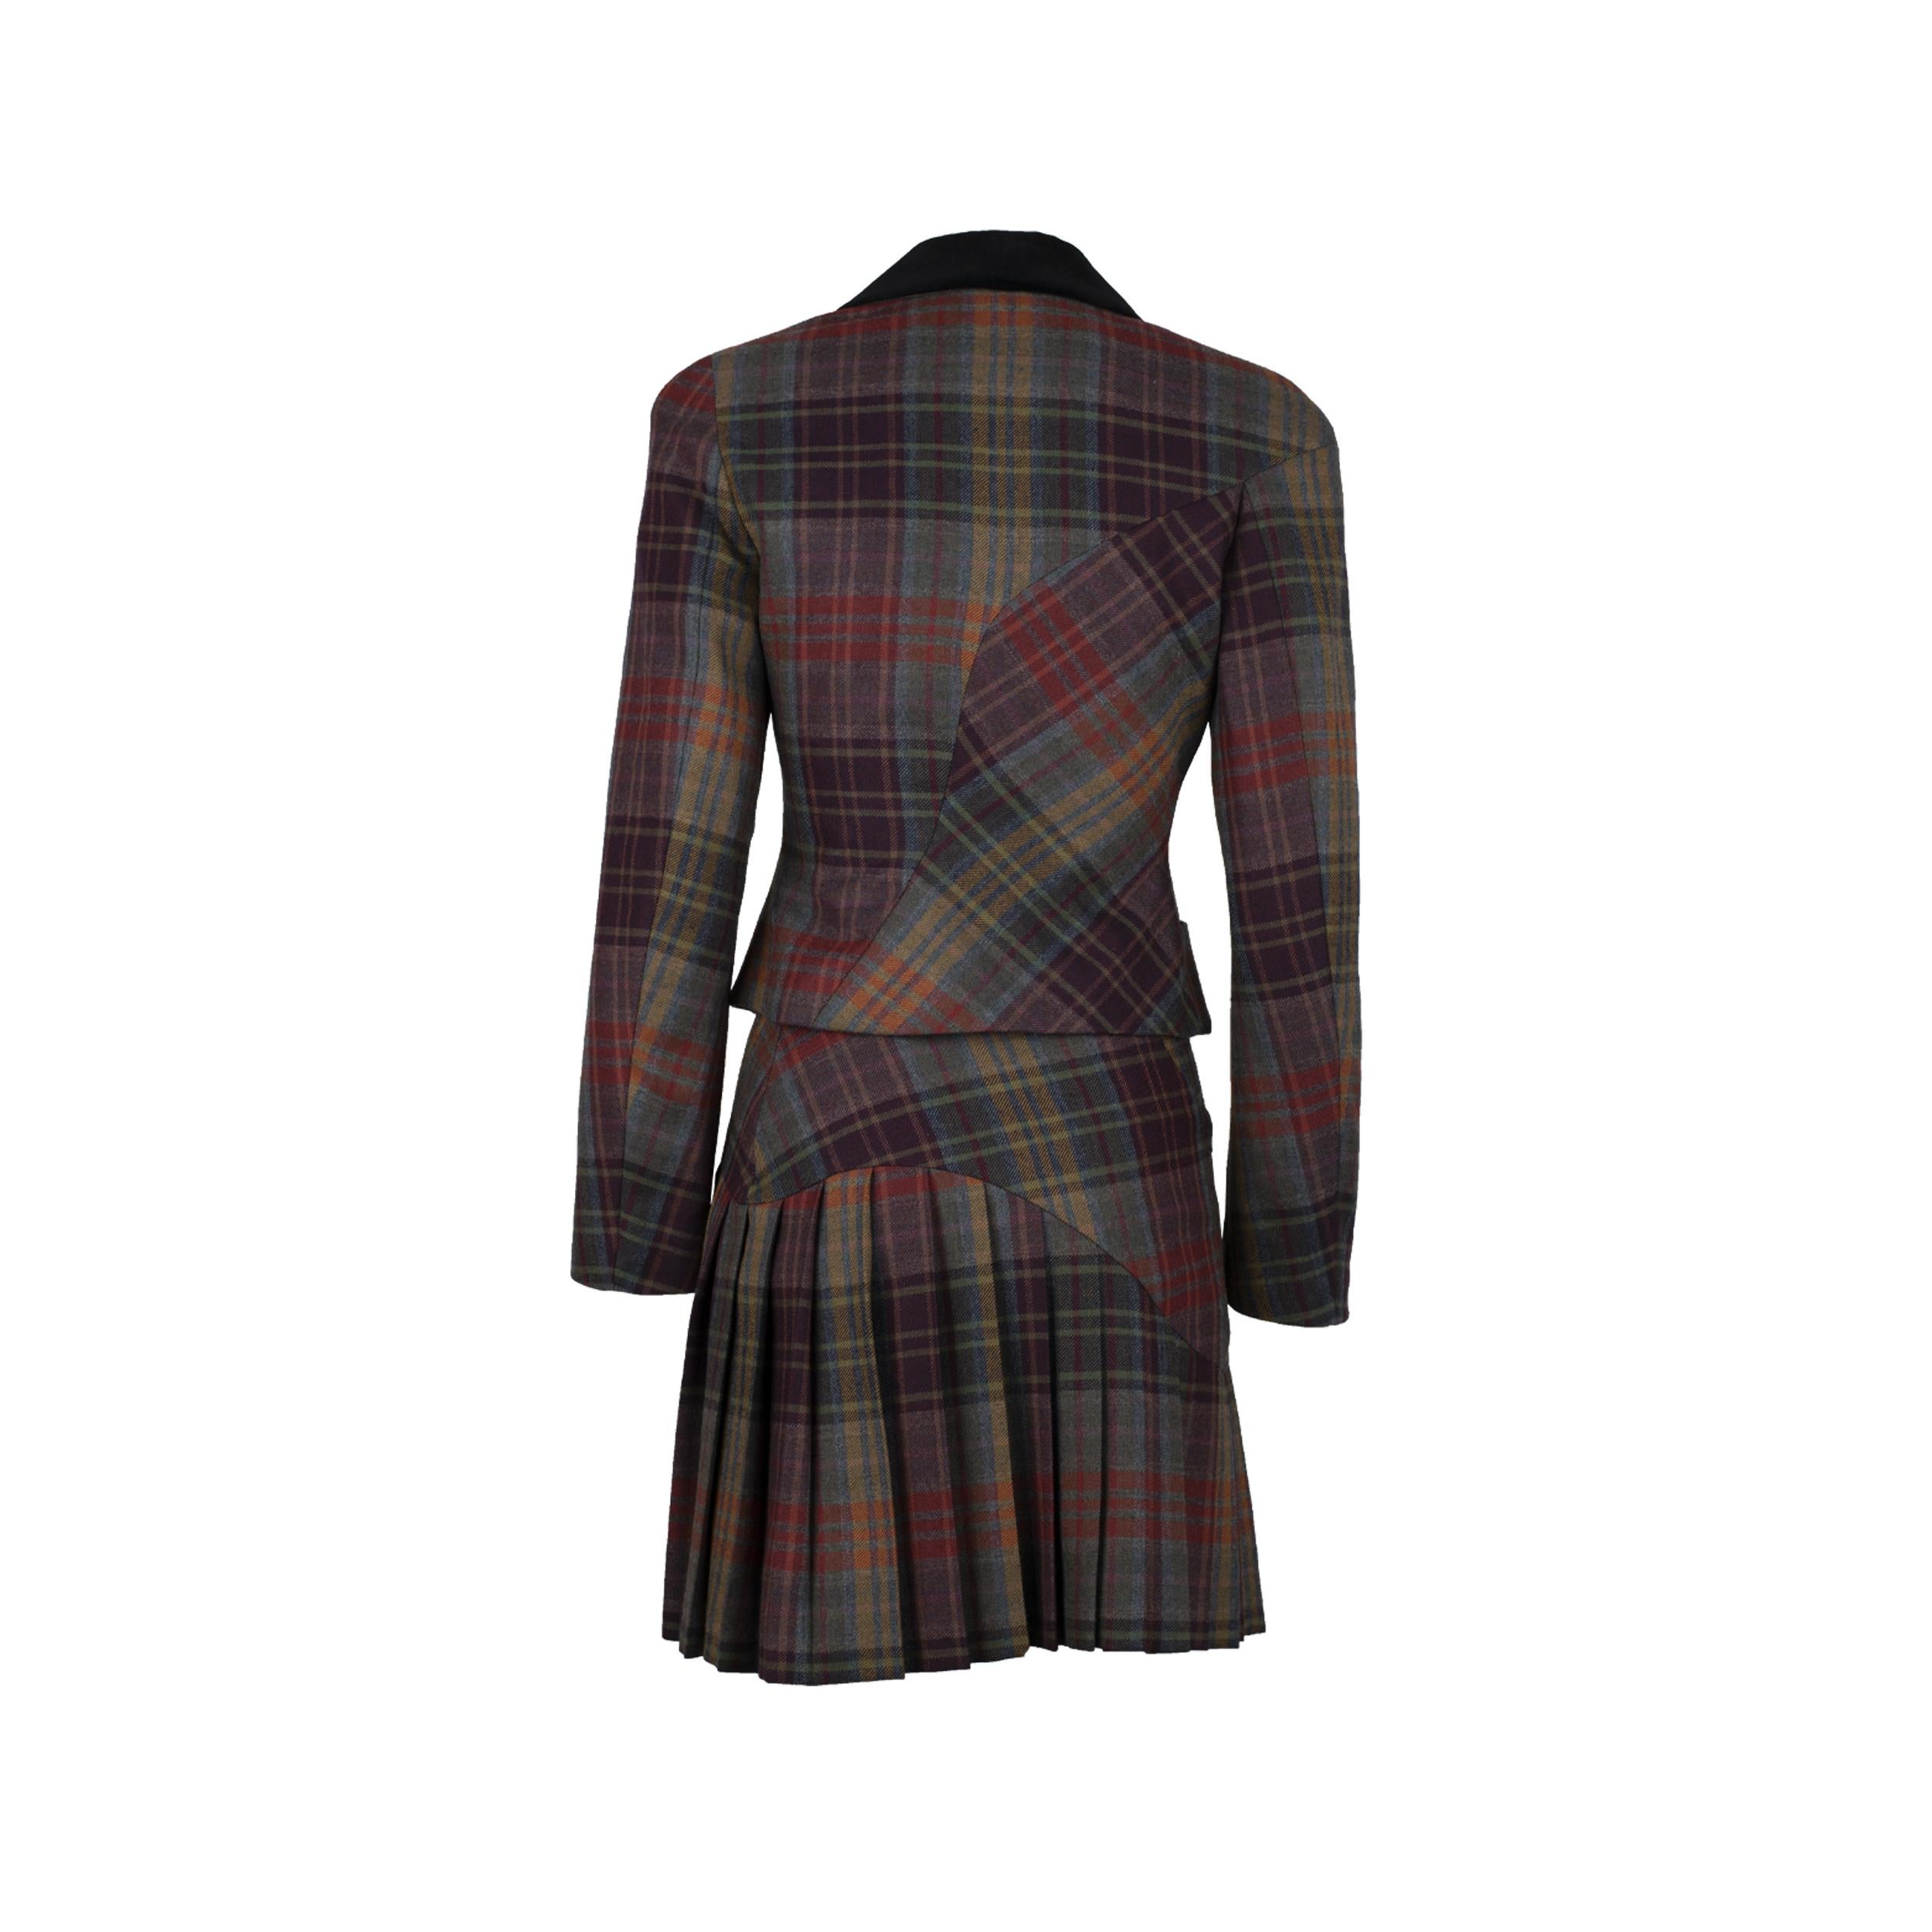 Vivienne Westwood tartan set, including a jacket with long sleeve and asymmetrical button fastening, and pleated skirt with zip fastening.

Composition
100% Wool Lining: 54% Acetate, 46% Viscose

Product measurements

Total length -50 cm
Bust - 42